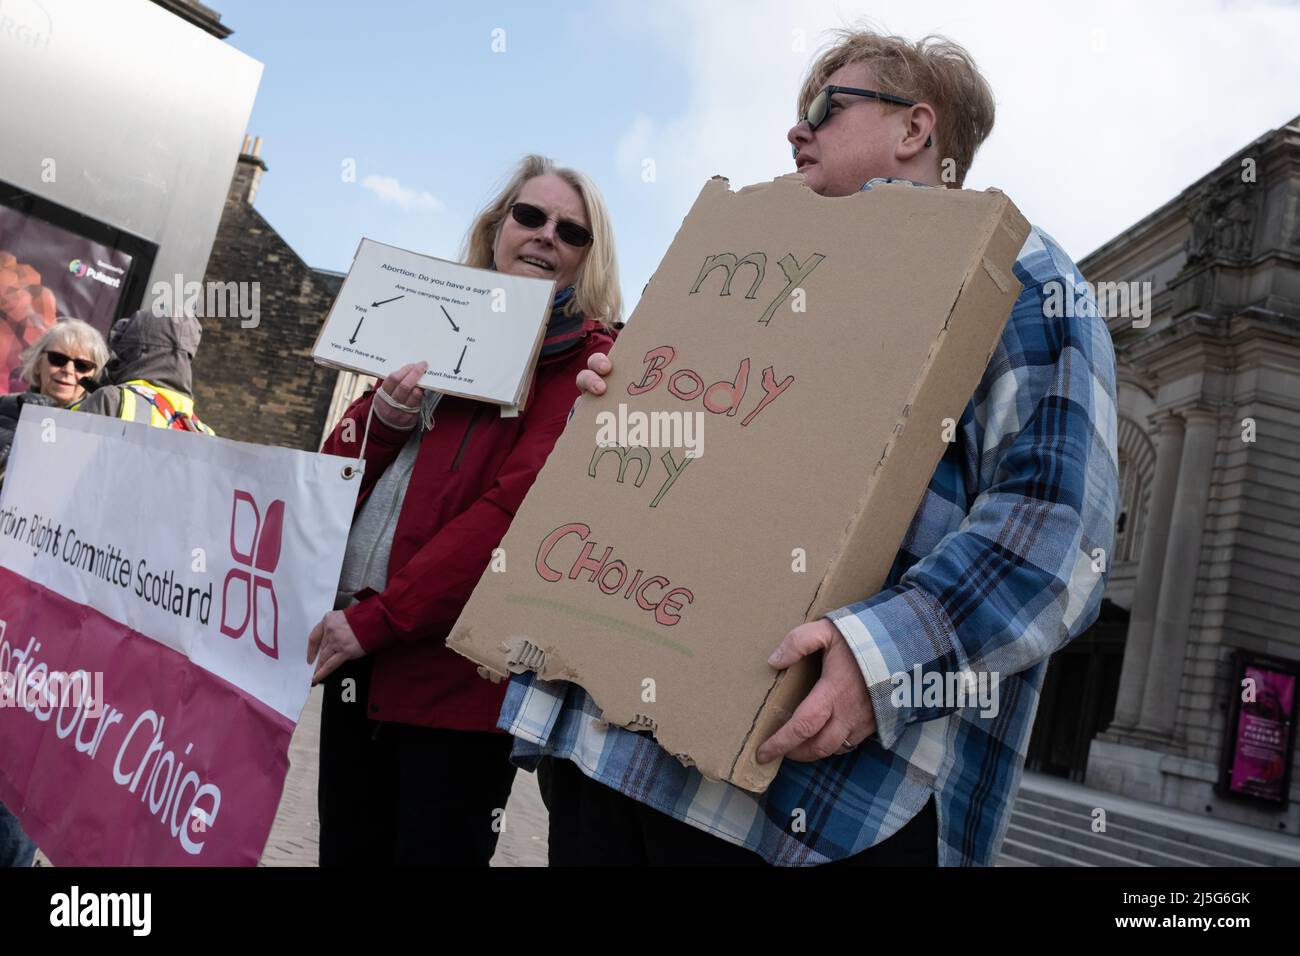 Edinburgh, UK, 23rd April 2022. Pro-Choice campaigners hold placards, as Pro-Life and Pro-Choice campaigners face each other across Lothian Road, on the anniversary day of the 1967 Abortion Act becoming law. A private membersÕ bill has been proposed for Scottish Parliament to stop Pro-Life campaigning outside hospitals. In Edinburgh, UK, 23 April 2022. Stock Photo